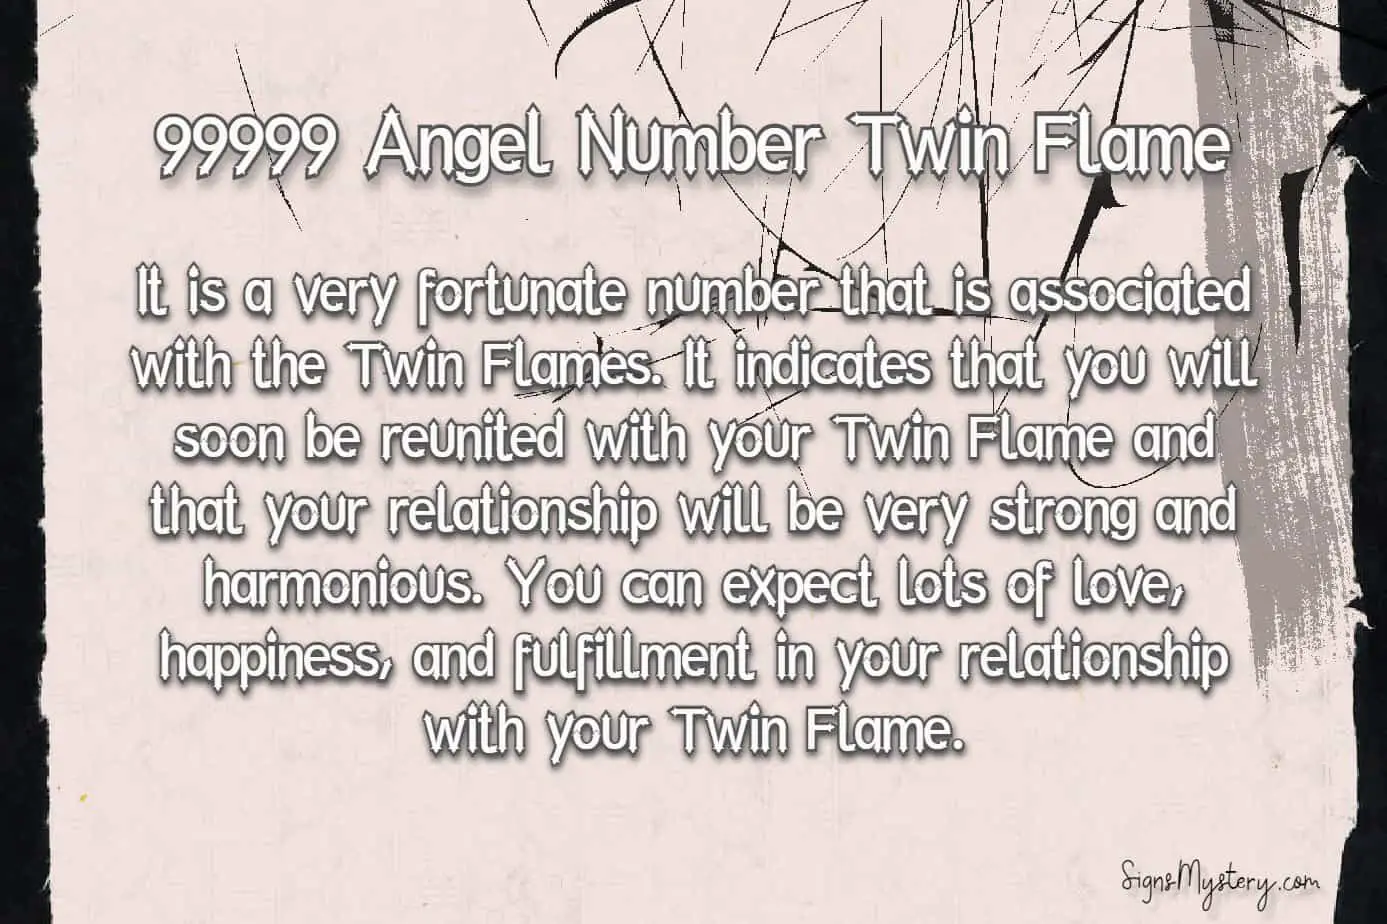 99999 angel number twin flame